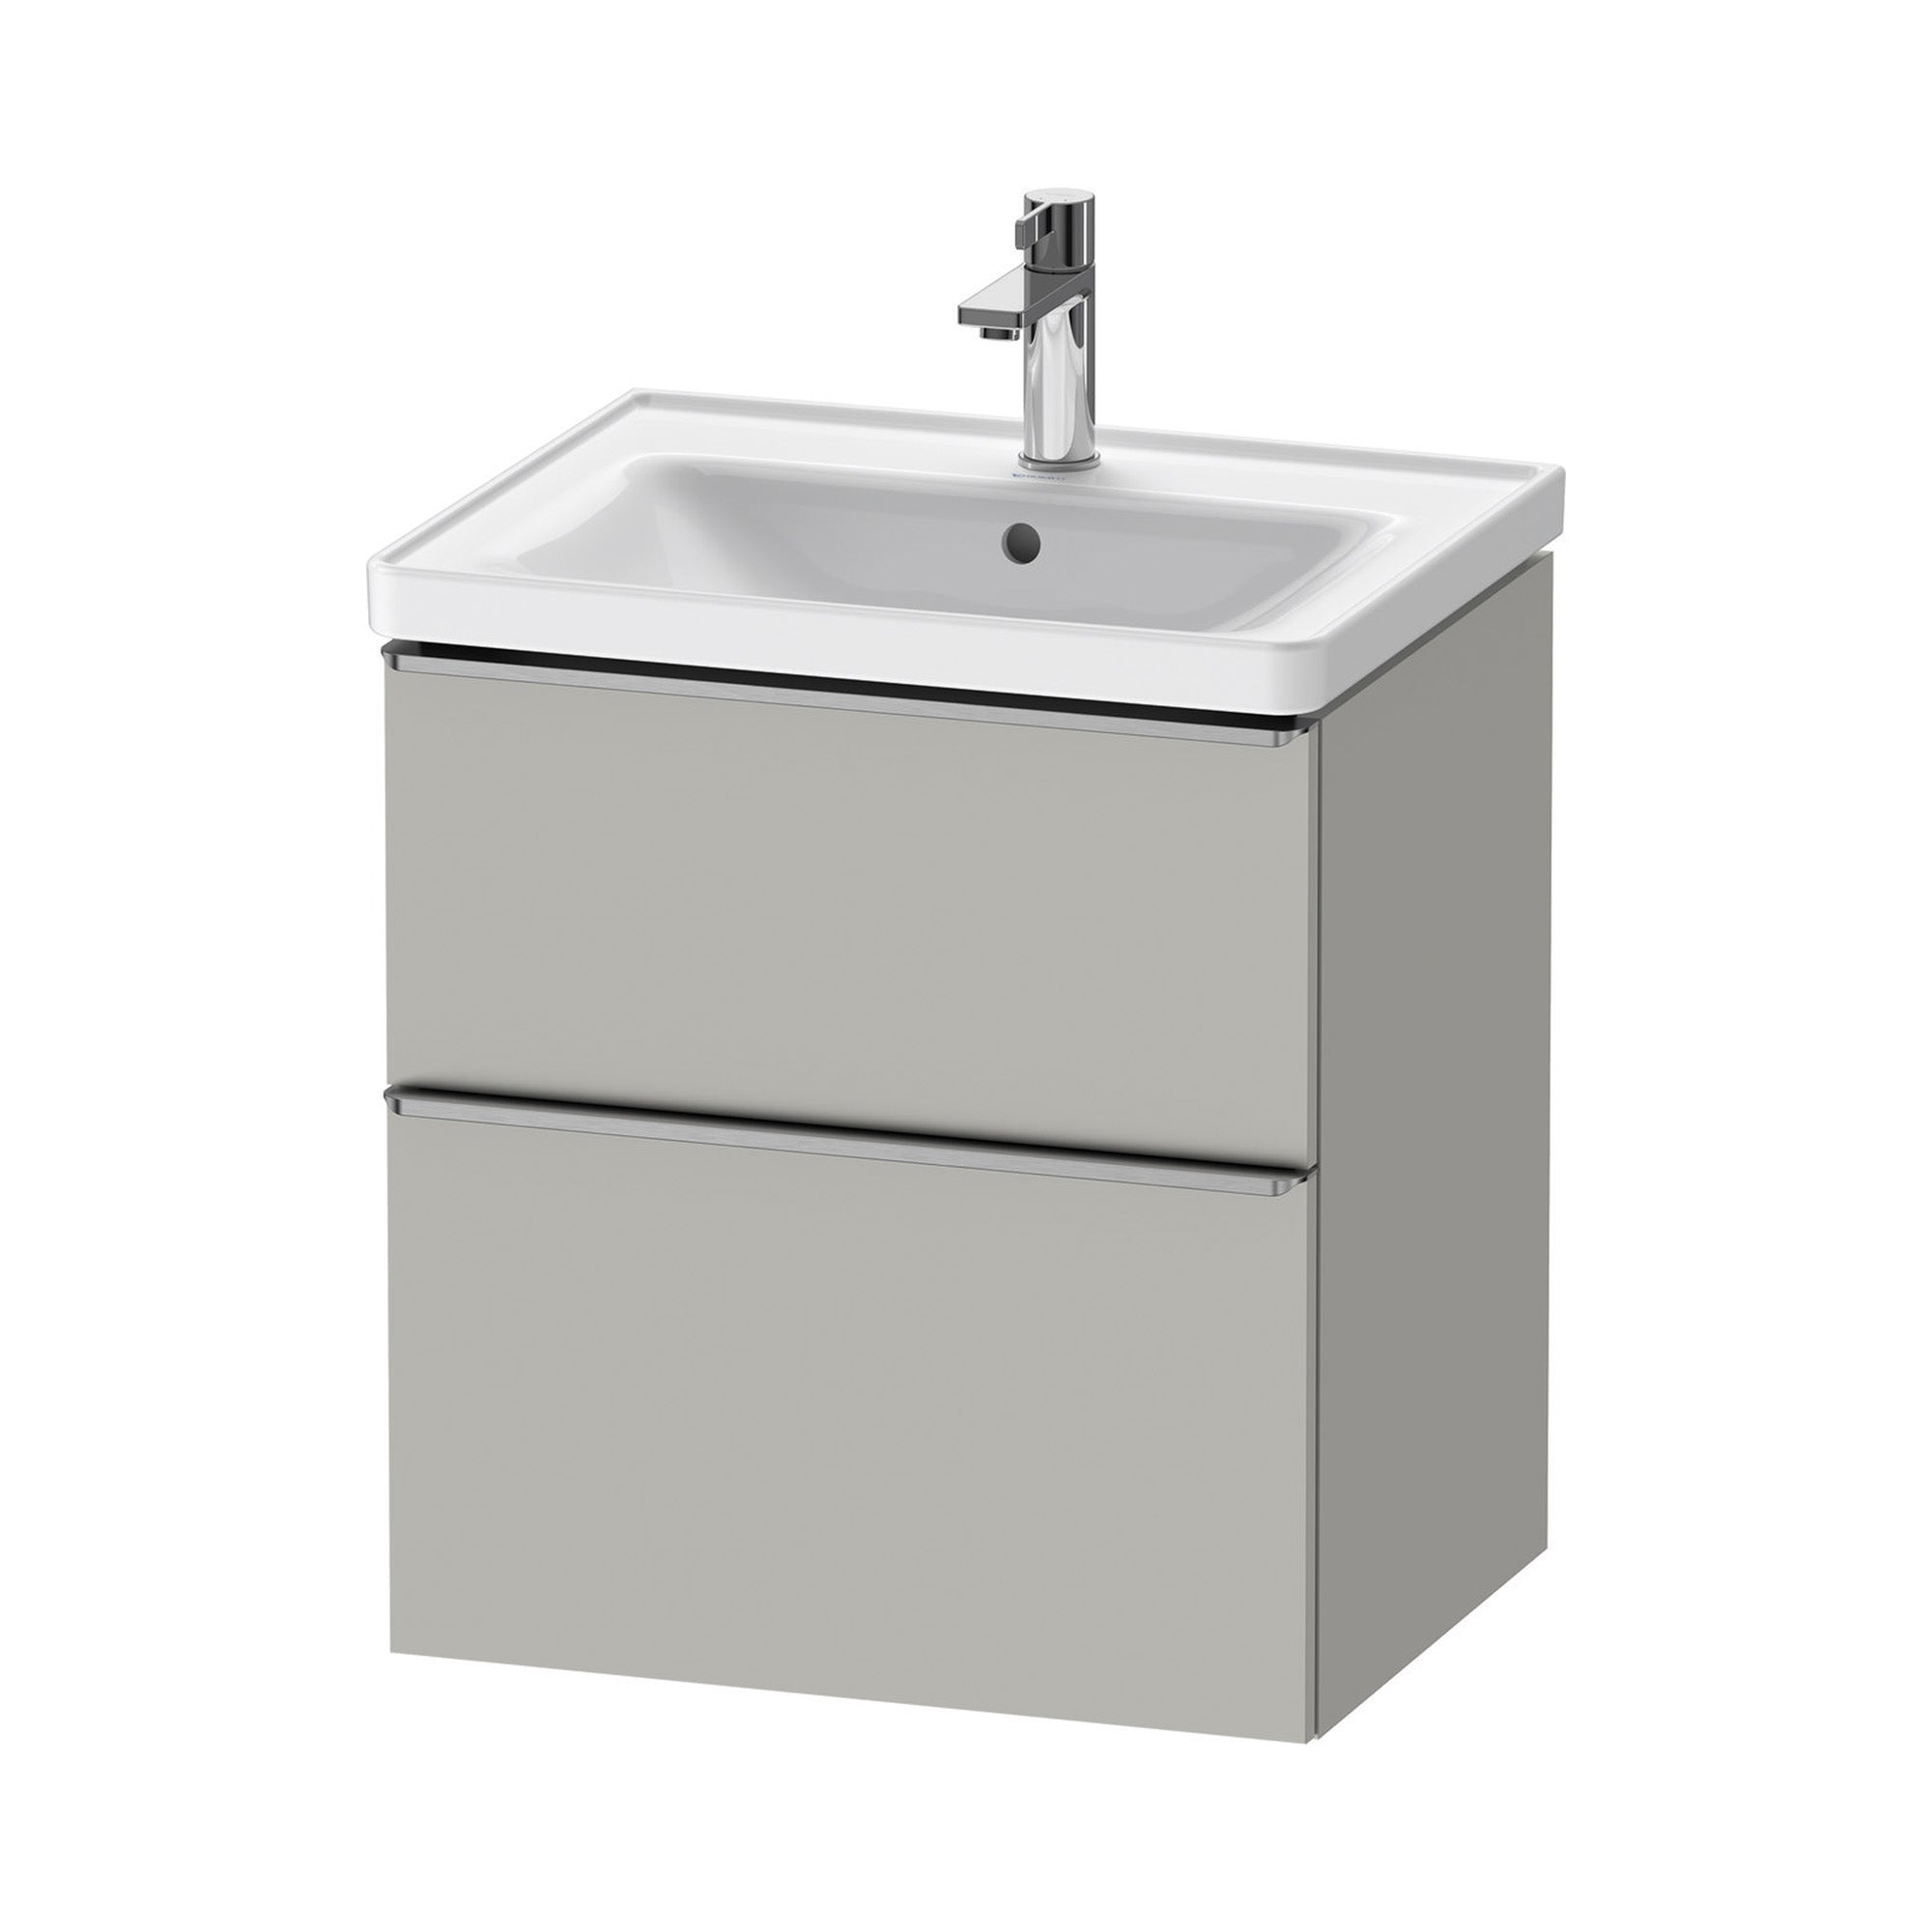 duravit d-neo 600 wall mounted vanity unit with d-neo basin concrete grey stainless steel handles